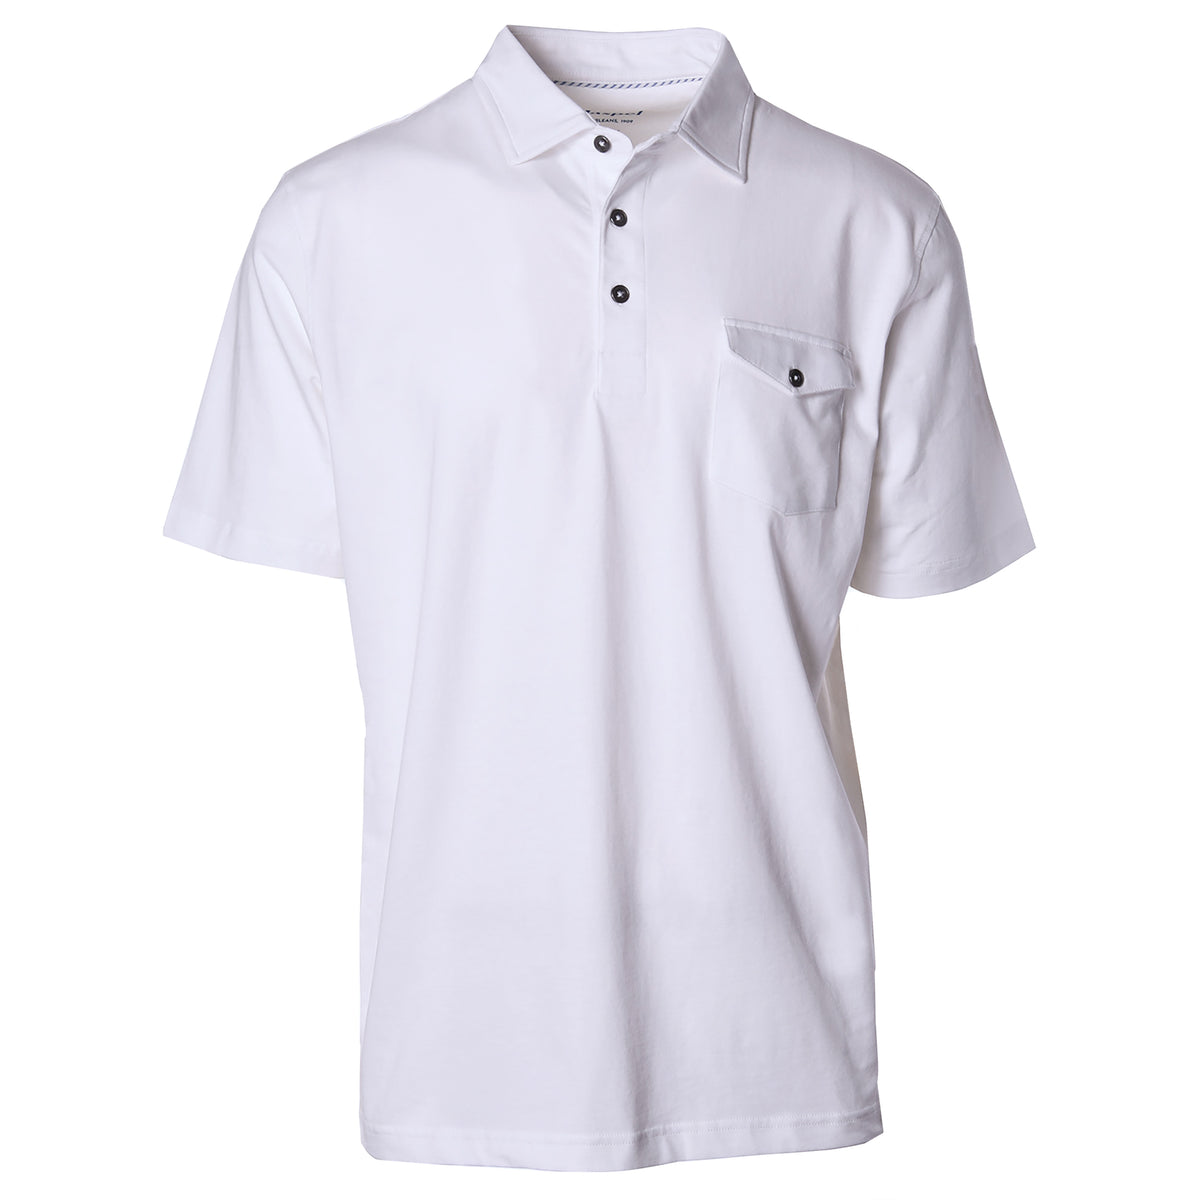 This polo is the equivalent of walking the throwback streets of Havana. 70&#39;s vibe with modern stretch tech to keep you cool and comfortable.  95% Cotton / 5% Spandex • Our Signature Seersucker Piping • 3 Button Placket • Flap Button Pocket • Open Sleeve • Tag-less / Printed Label for Ultimate Comfort • Stretch Comfort • Machine Wash